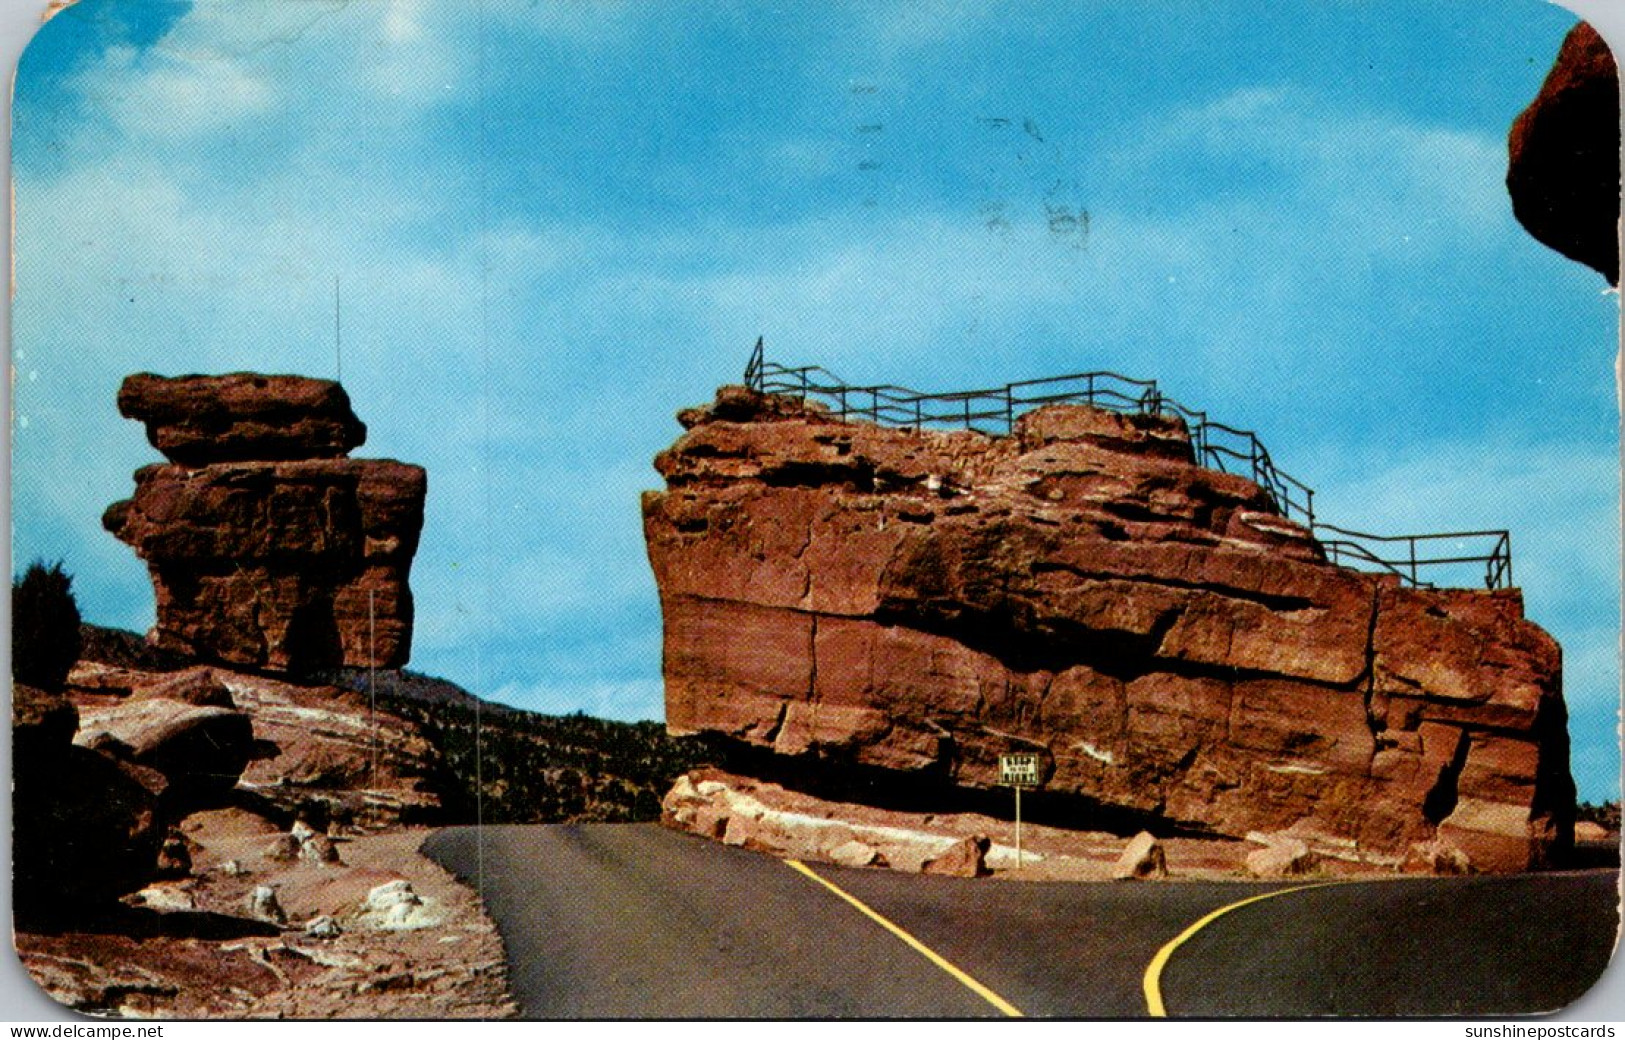 Colorado PIkes Peak Region Balanced And Steamboat Rocks In The Garden Of The Gods 1959 - Colorado Springs